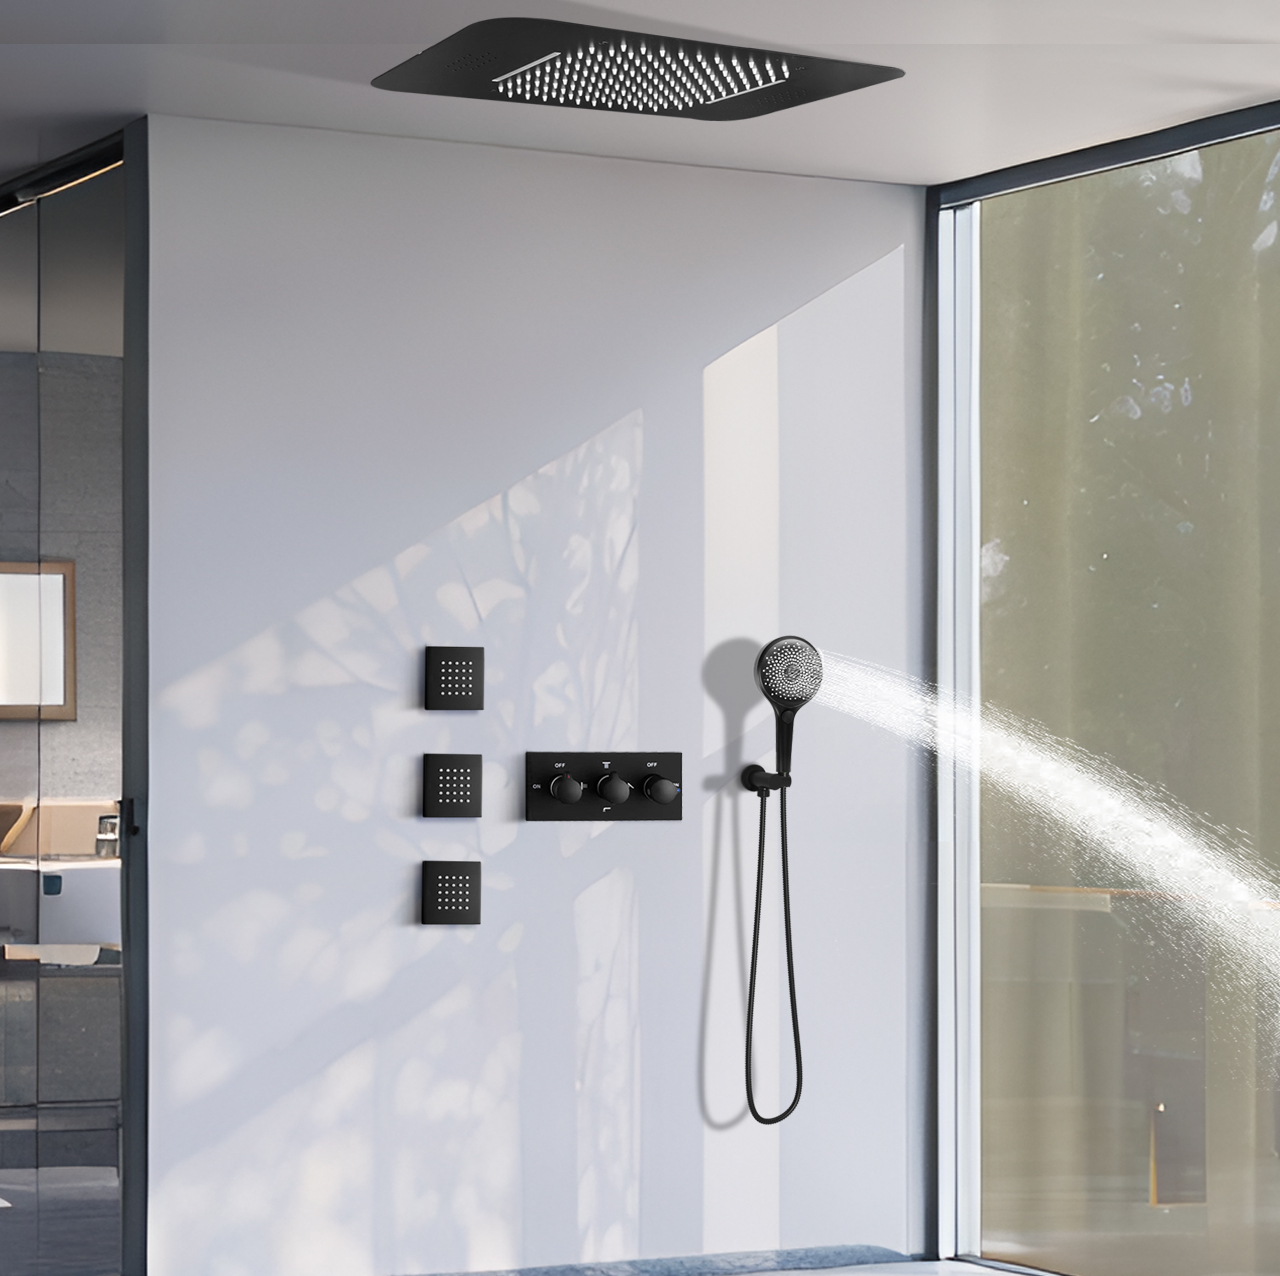 Ducky Black Dark Bathroom LED Music Rain Water Waterfall System Constant Temperature Mixed Shower Water Faucet System Jet Kit